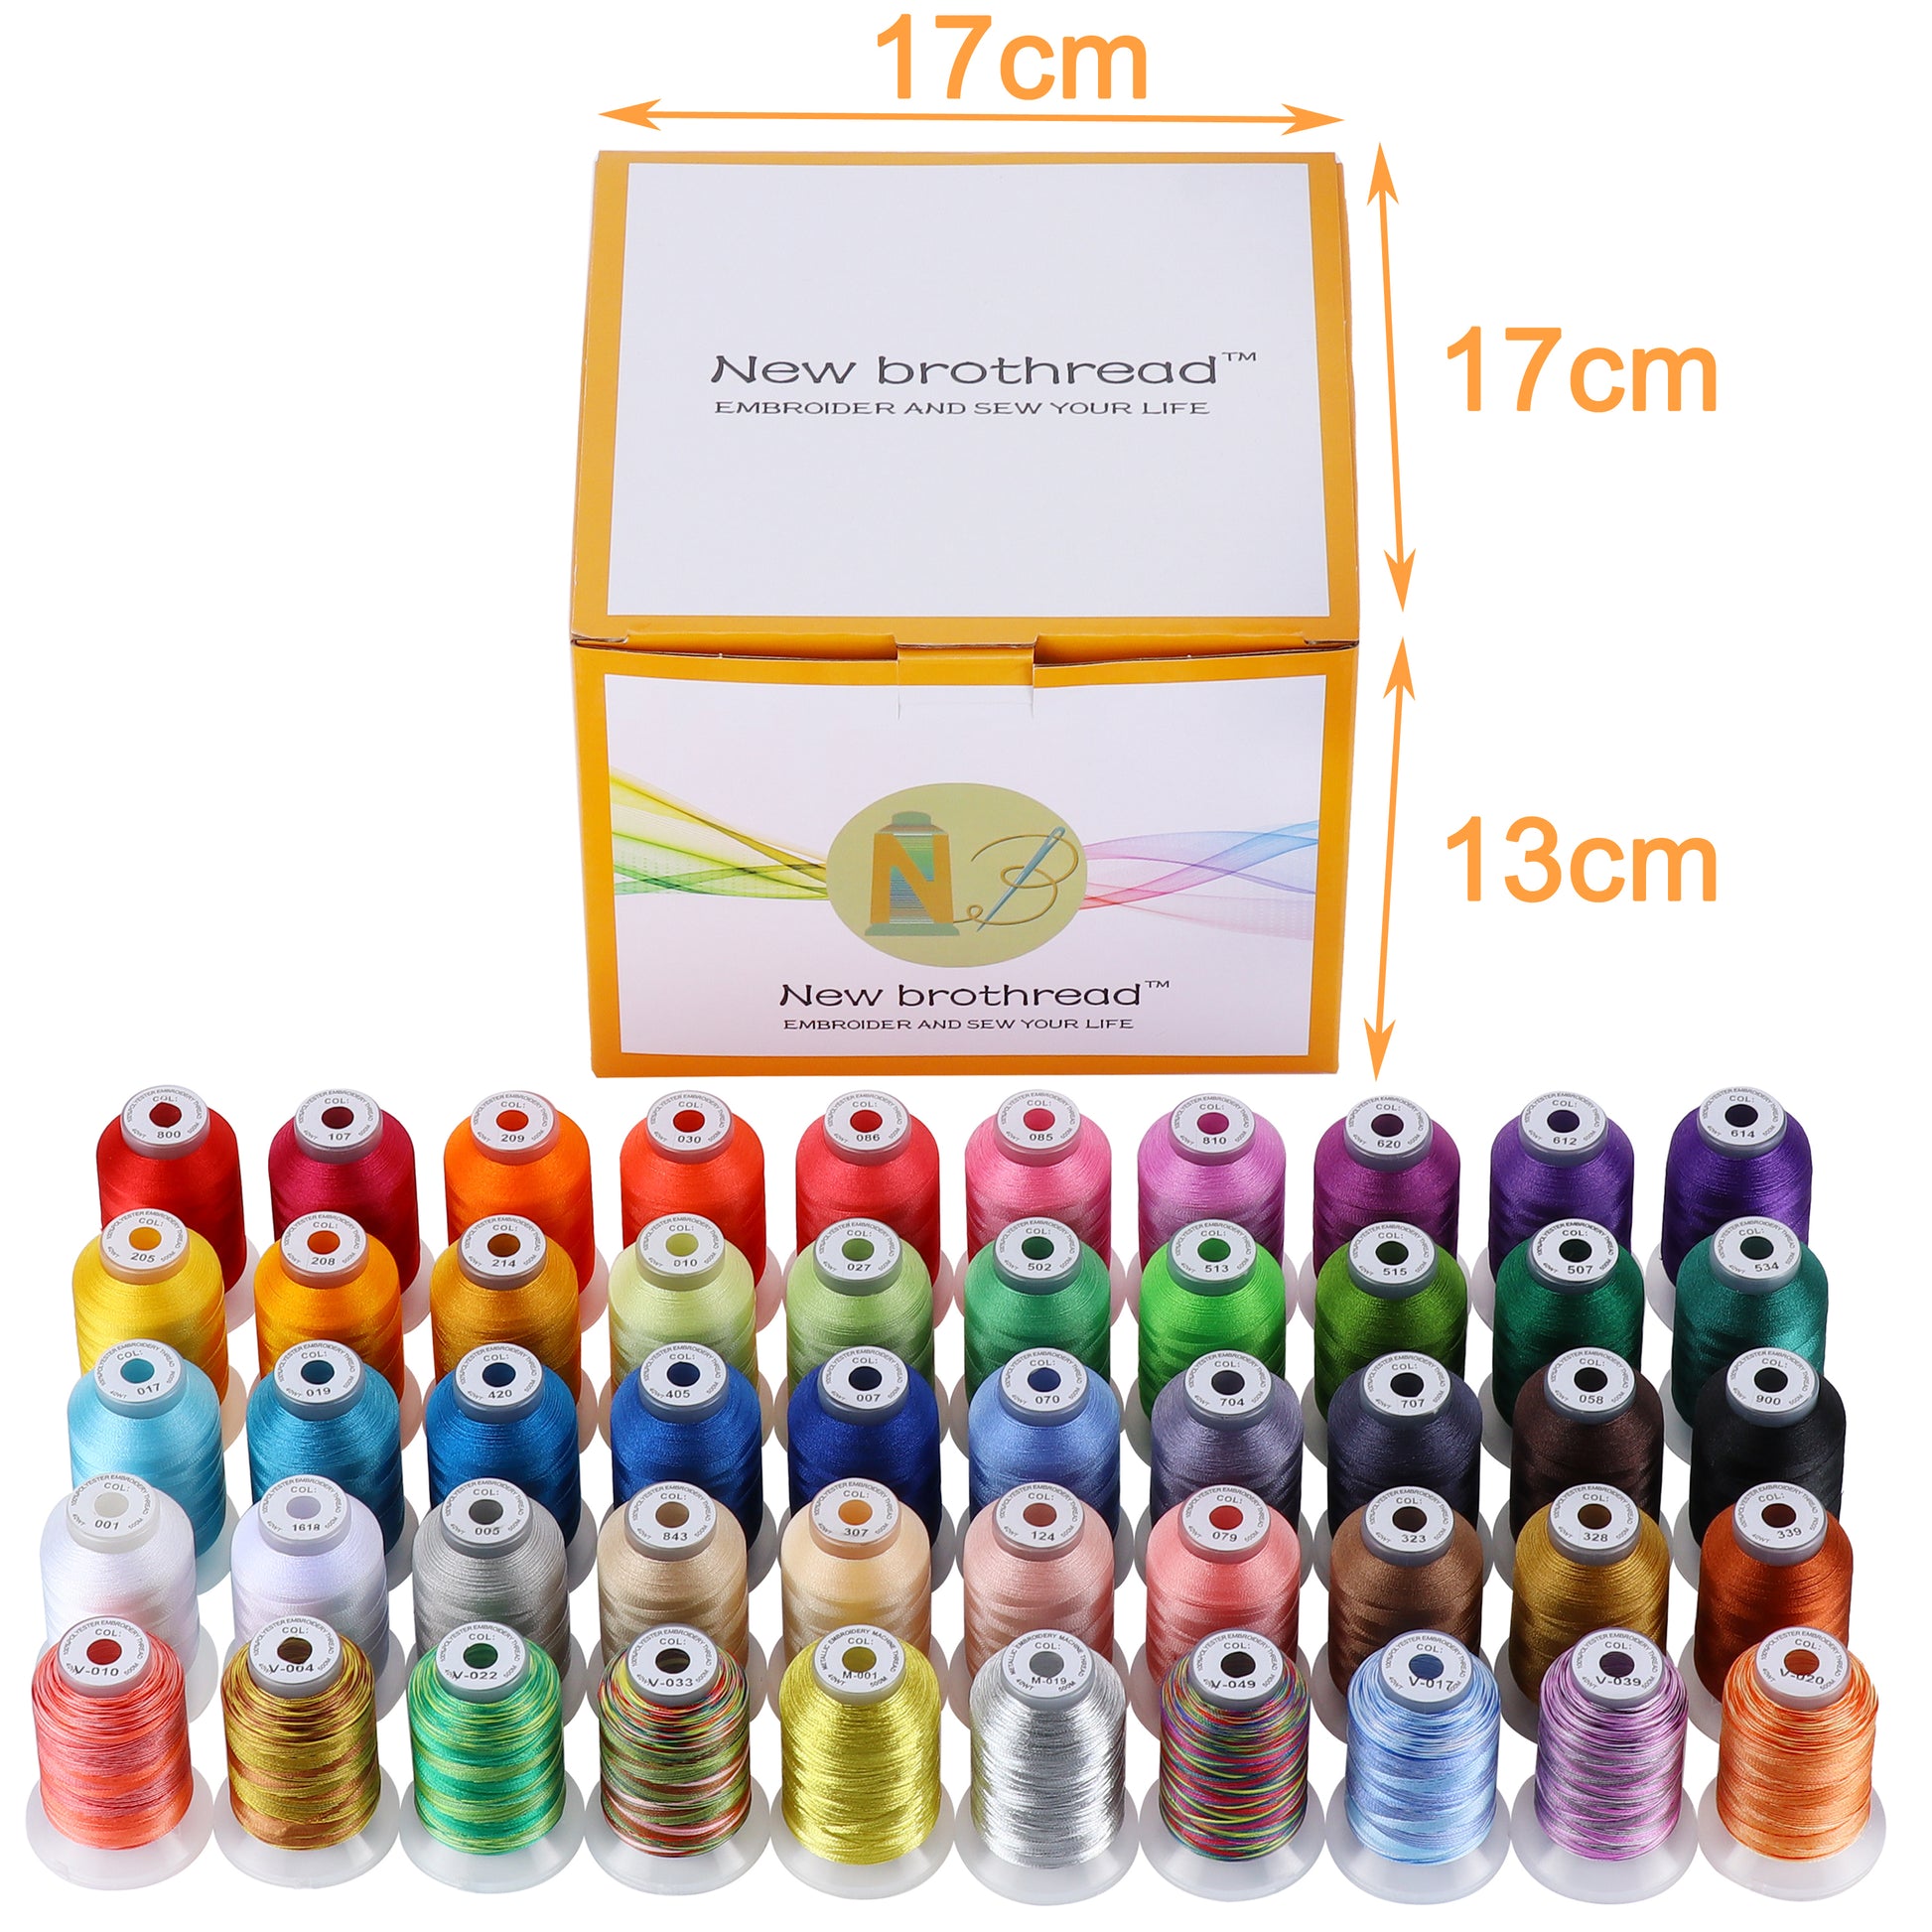 New brothreads 40 Brother Colors Polyester Machine Embroidery Thread Kit  500M Each for Home-Based Embroidery and Sewing Machine